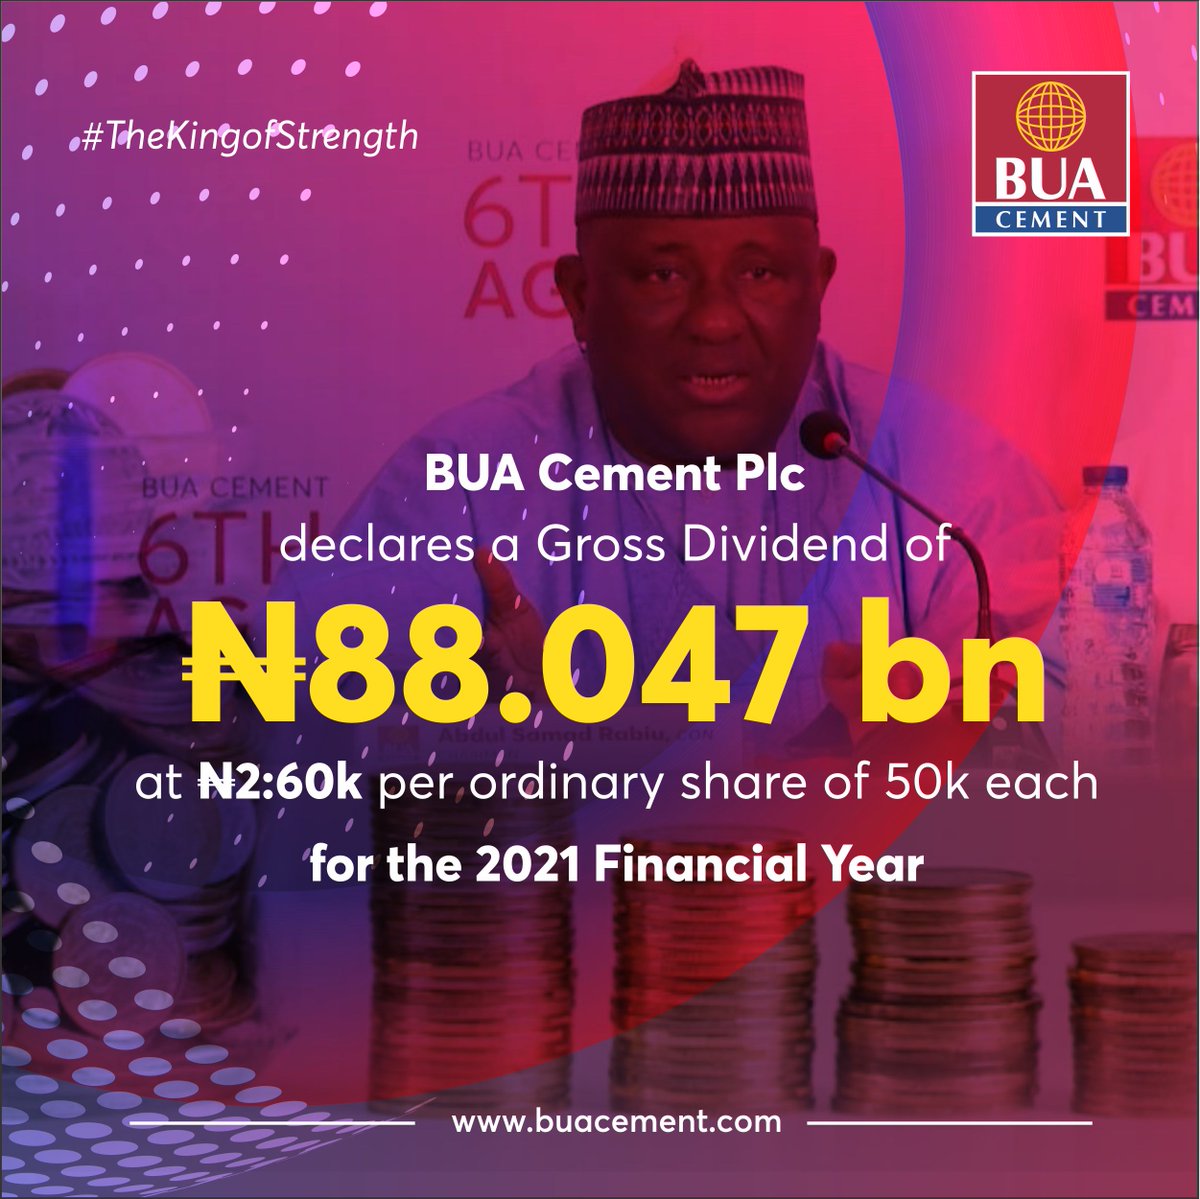 BUA Cement Plc declares a Gross Dividend of N88.047bn at N2.60k per ordinary share of 50k each for the 2021 Financial Year.

cc. @BUAgroup 

#BUACementPlc #TheKingofStrength #InvestingForTheFuture